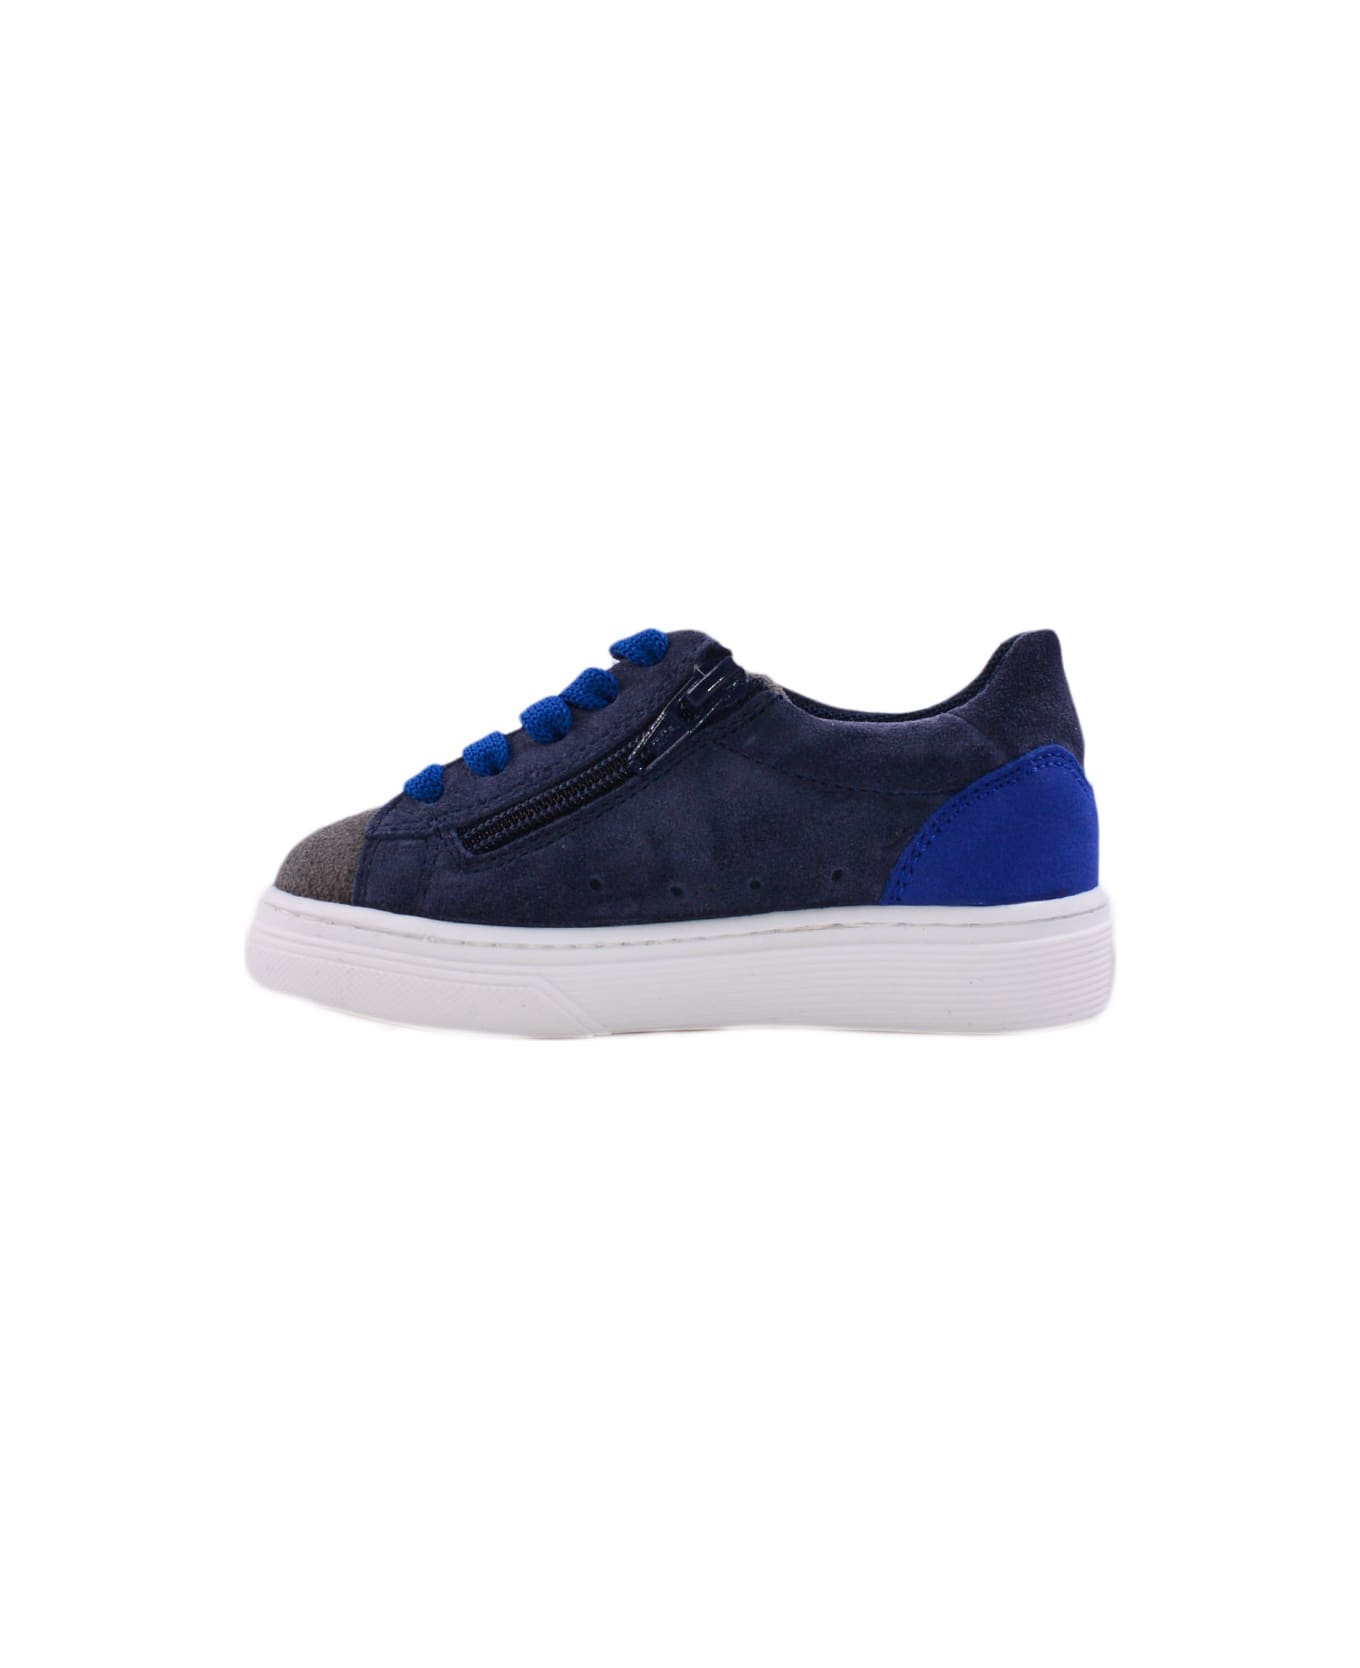 Hogan H365 Sneakers In Suede Leather - Blue シューズ